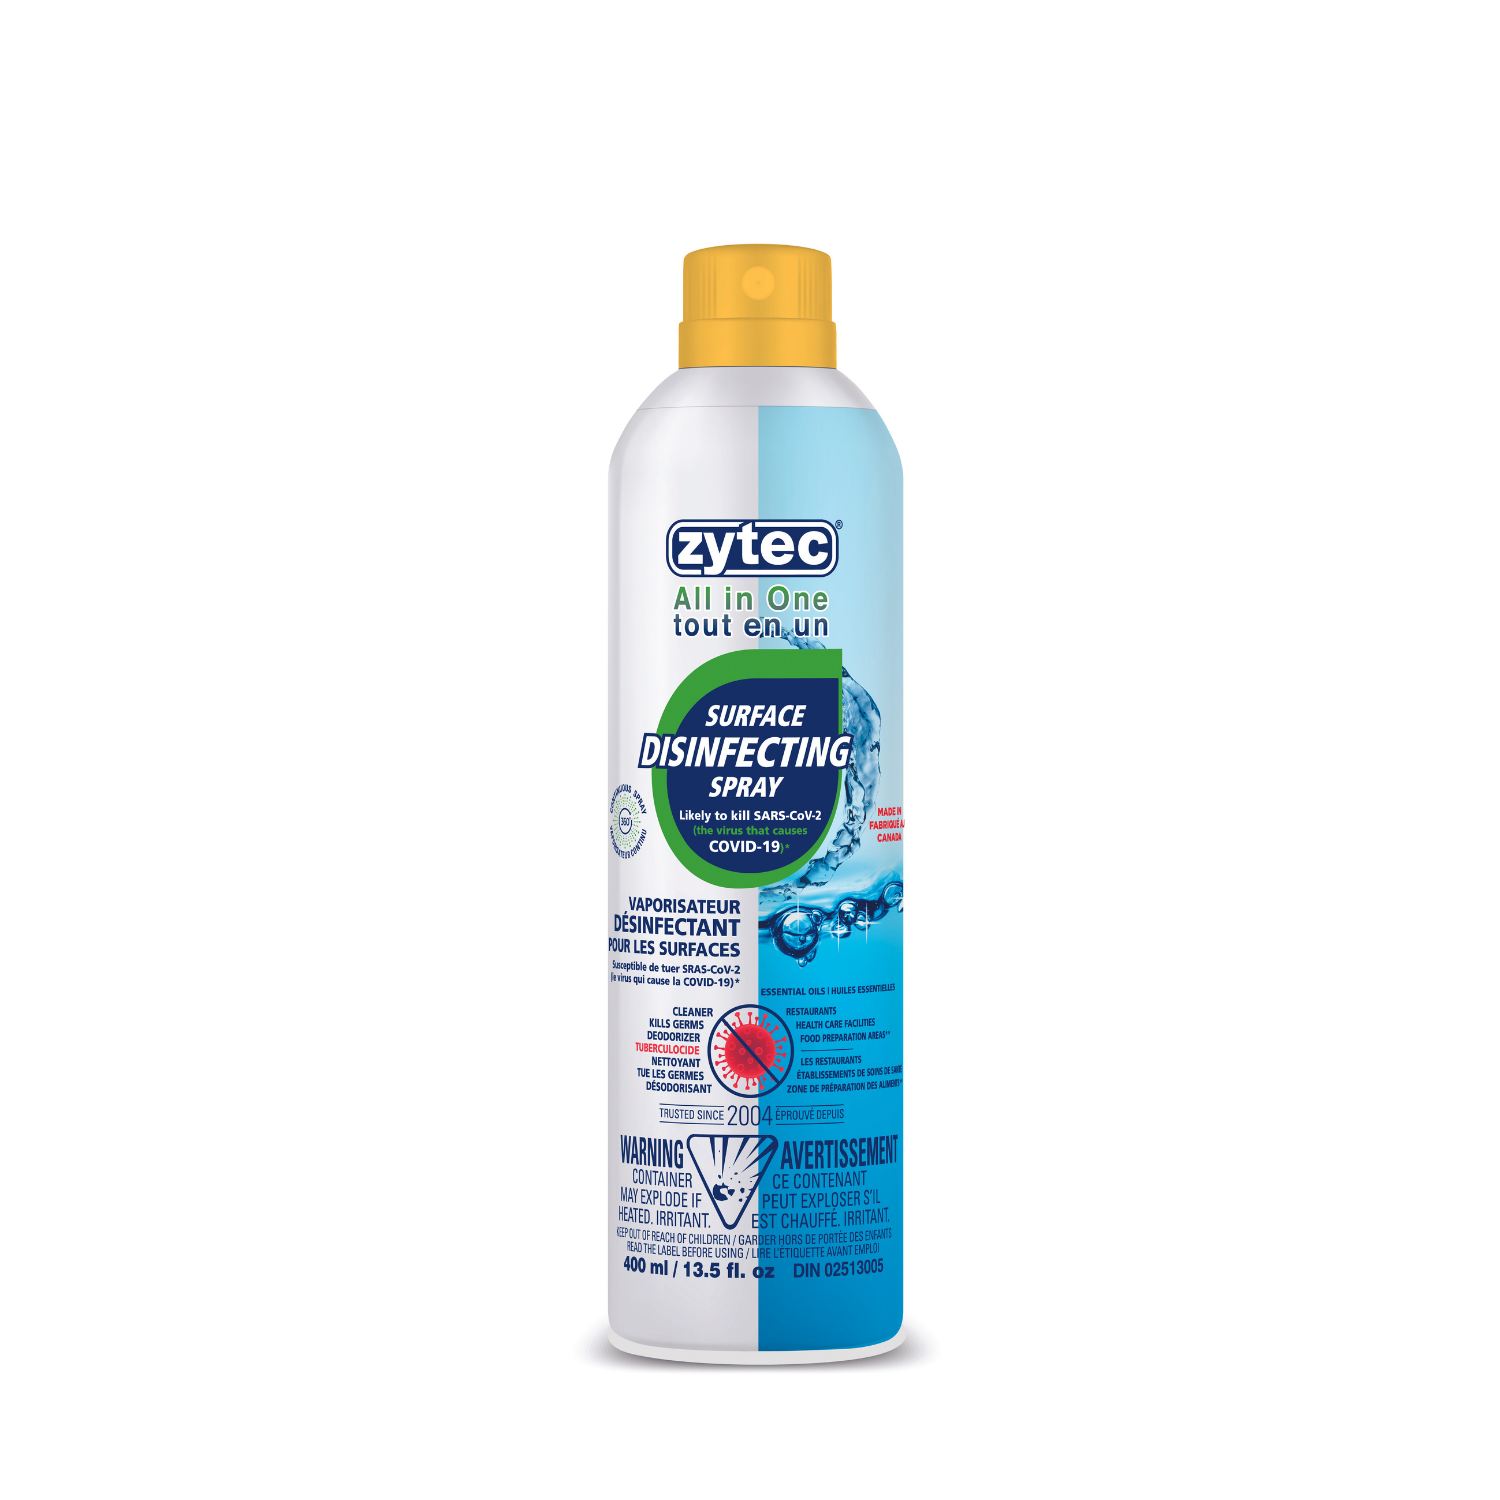 ZYTEC ALL IN ONE SURFACE DISINFECTING SPRAY 400ml / 13.5floz